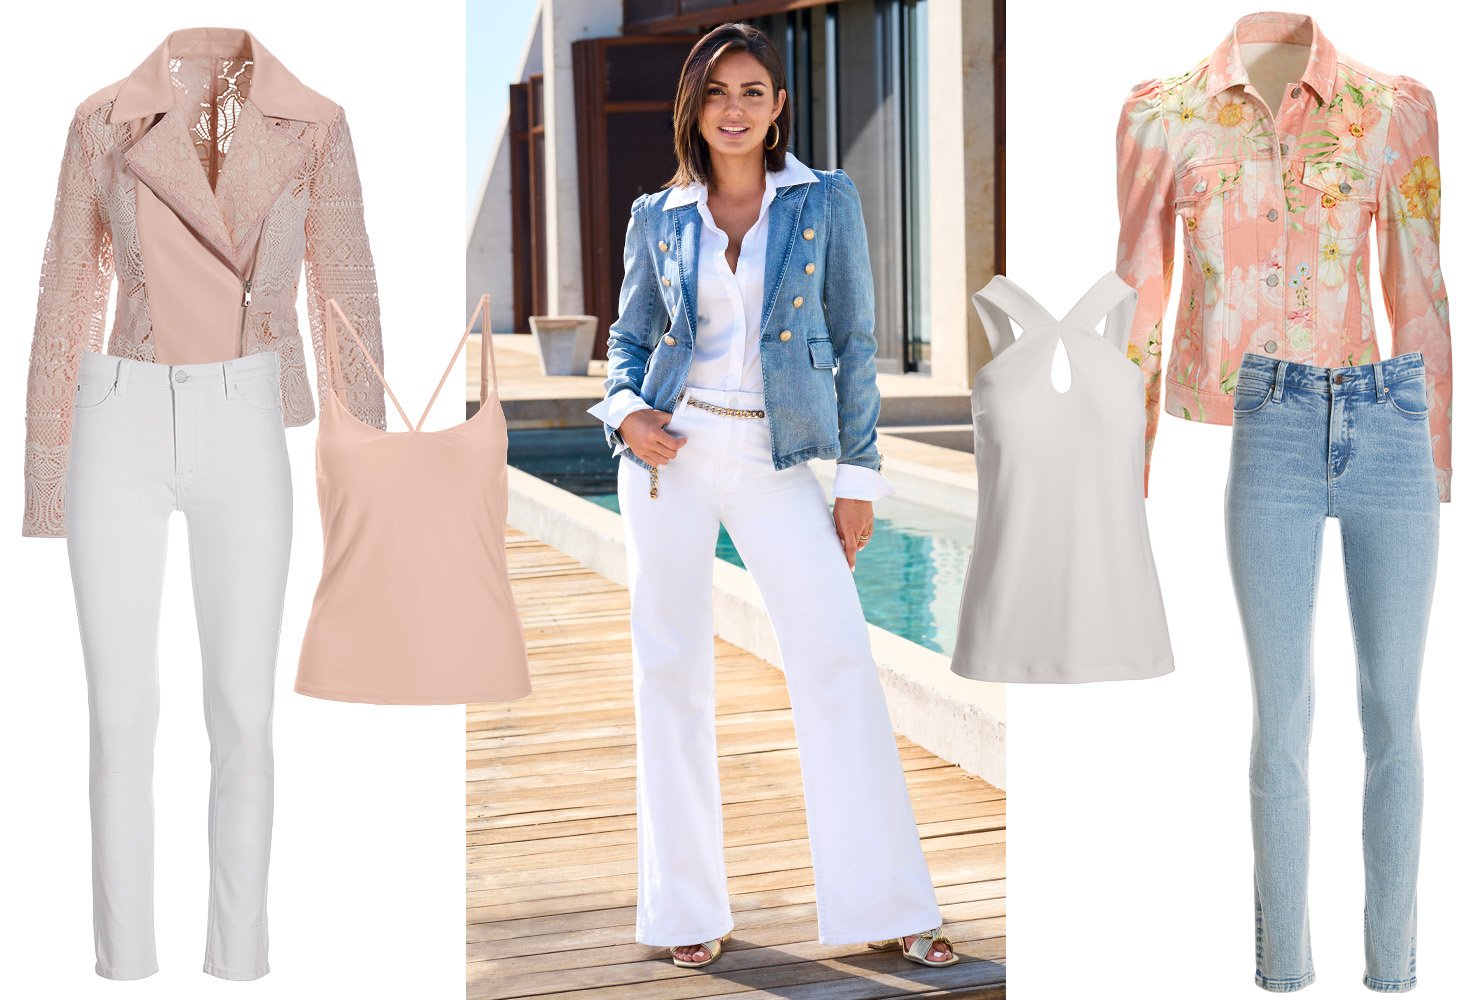 Left panel: blush leather and lace jacket, white jeans, and blush strappy camisole top. Center: model wearing a denim blazer, white button-down charmeuse blouse, white palazzo jeans, gold chain belt, gold hoop earrings, and gold knotted block heels. Right: pink floral print puff-sleeve denim jacket, white keyhole sleeveless top, and light wash jeans.